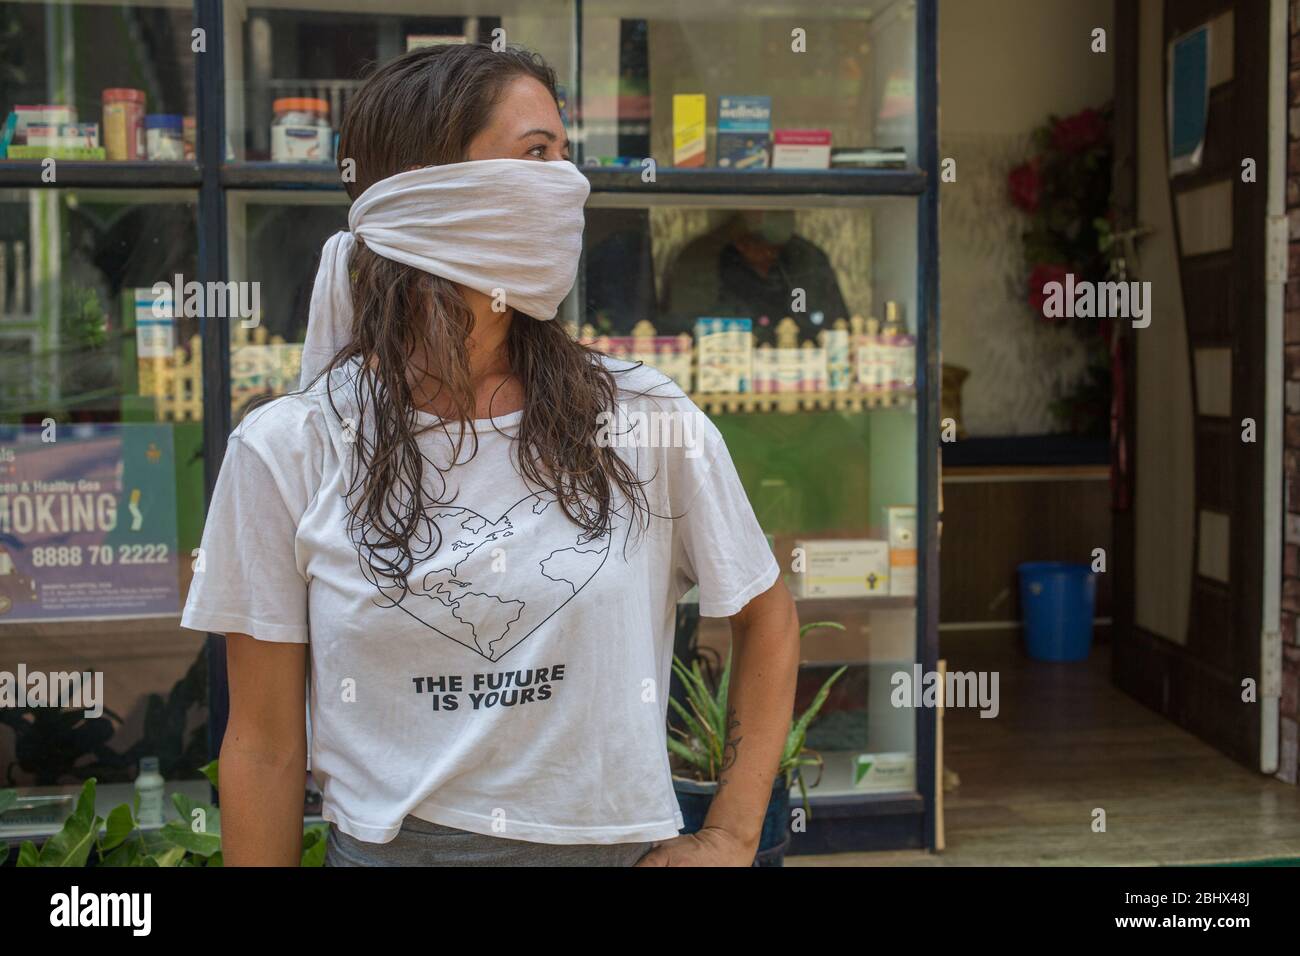 American tourist standing outside a pharmacy during the Covid-19 lockdown in India. Stock Photo